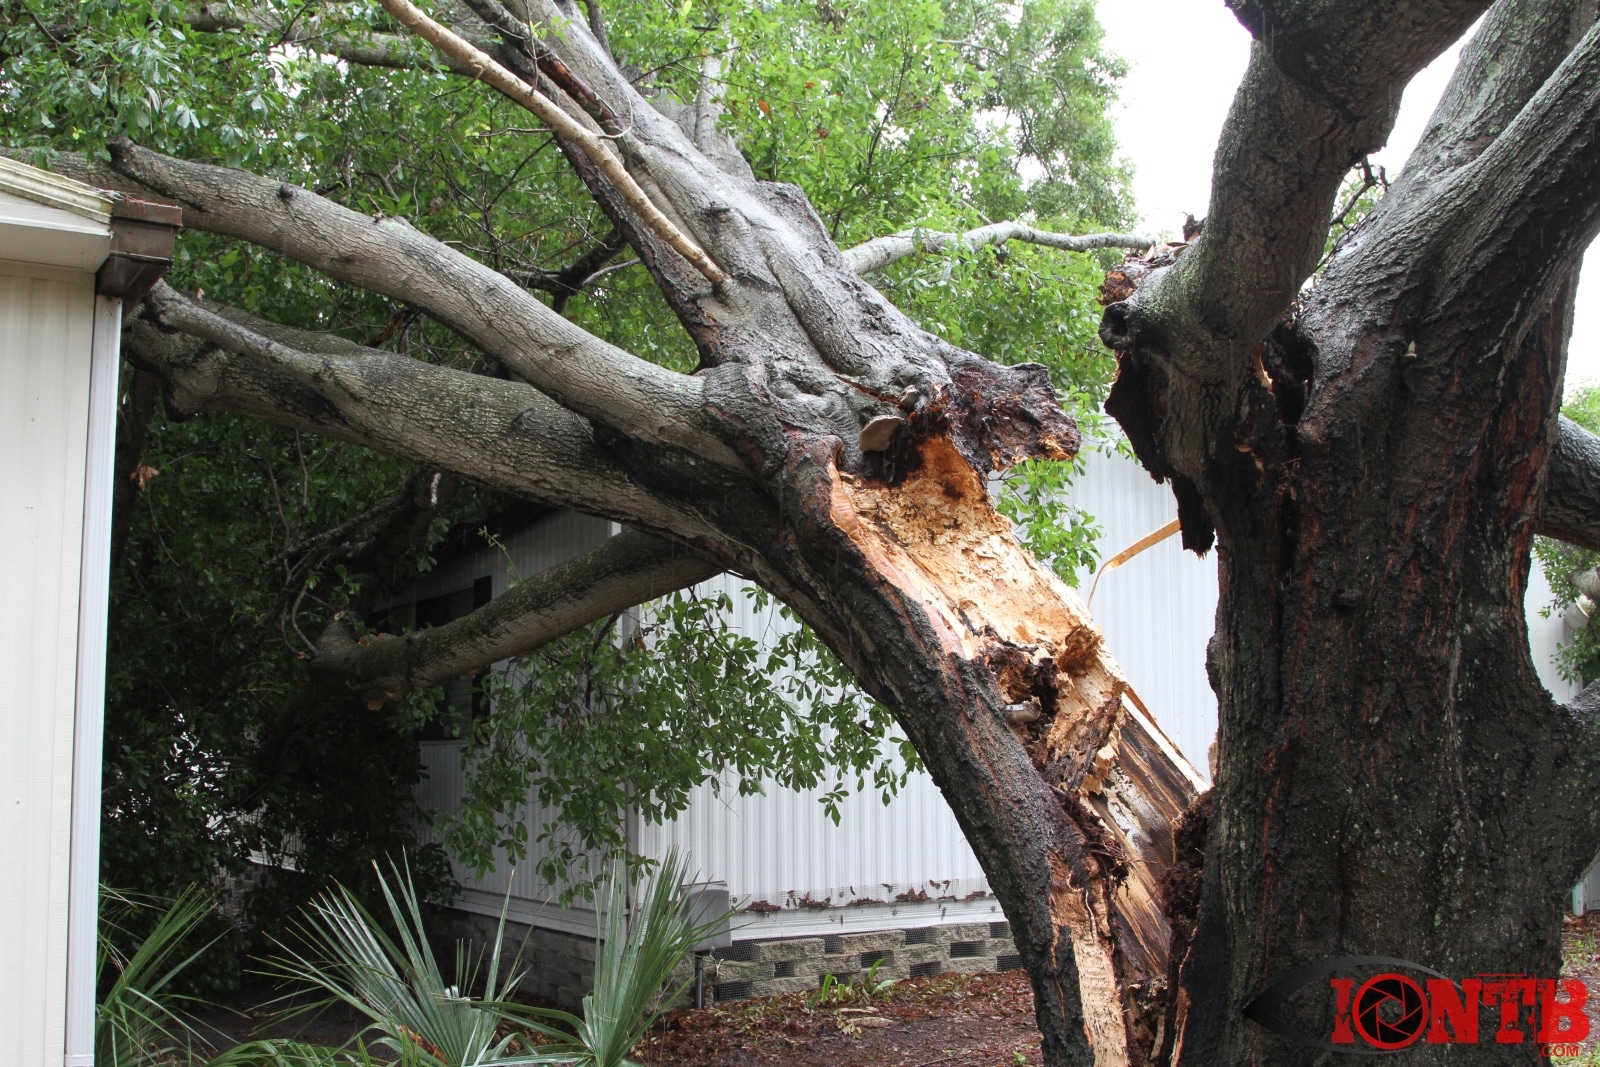 Additional Photos From Downed Oak Tree at Shady Lane Oaks